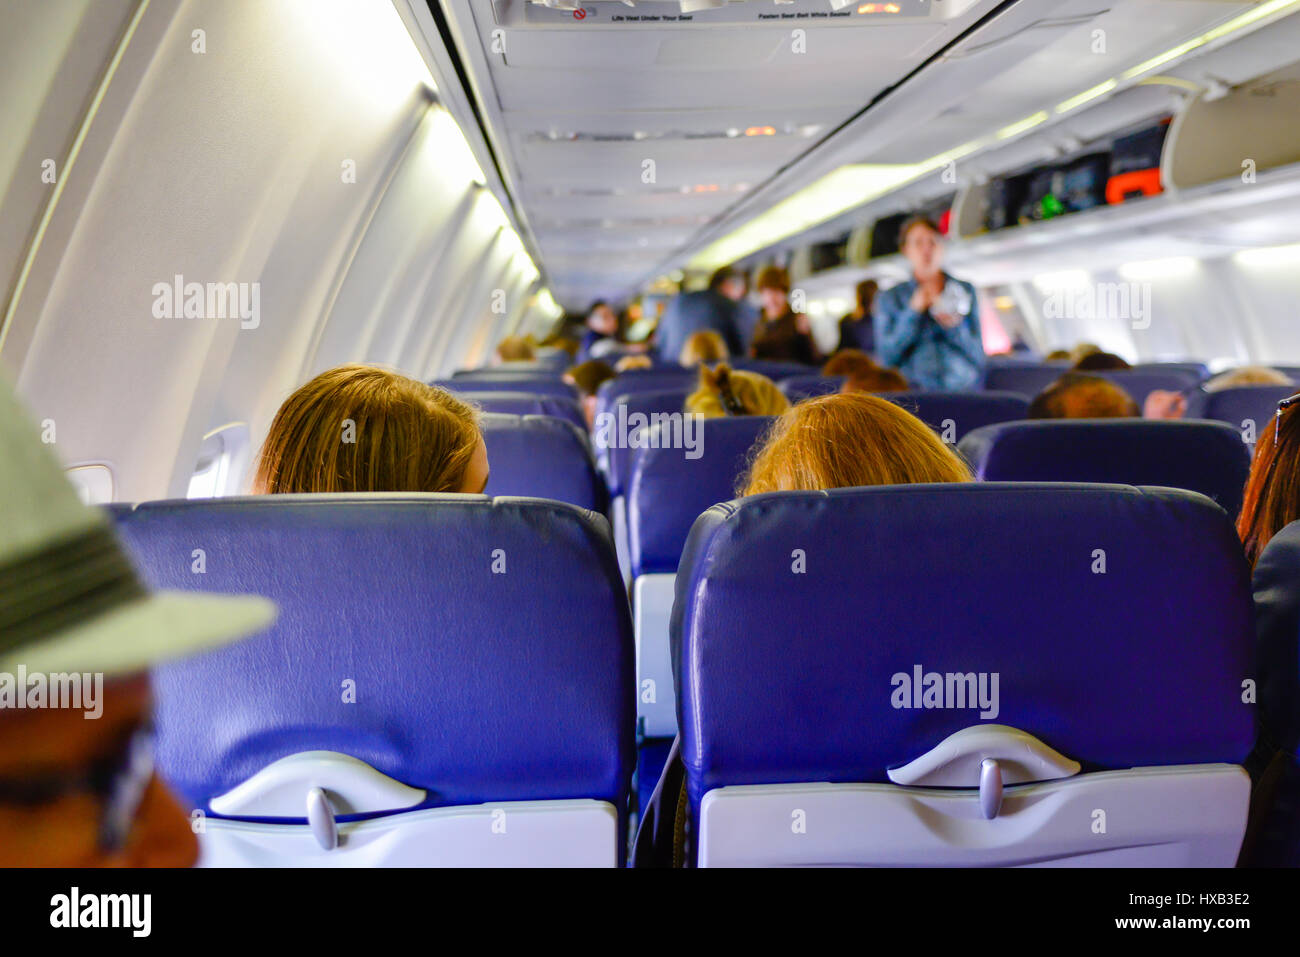 A view from the back of a commercial airplane of the cabin with people boarding, sitting & using overhead bins while flight attendants look on Stock Photo